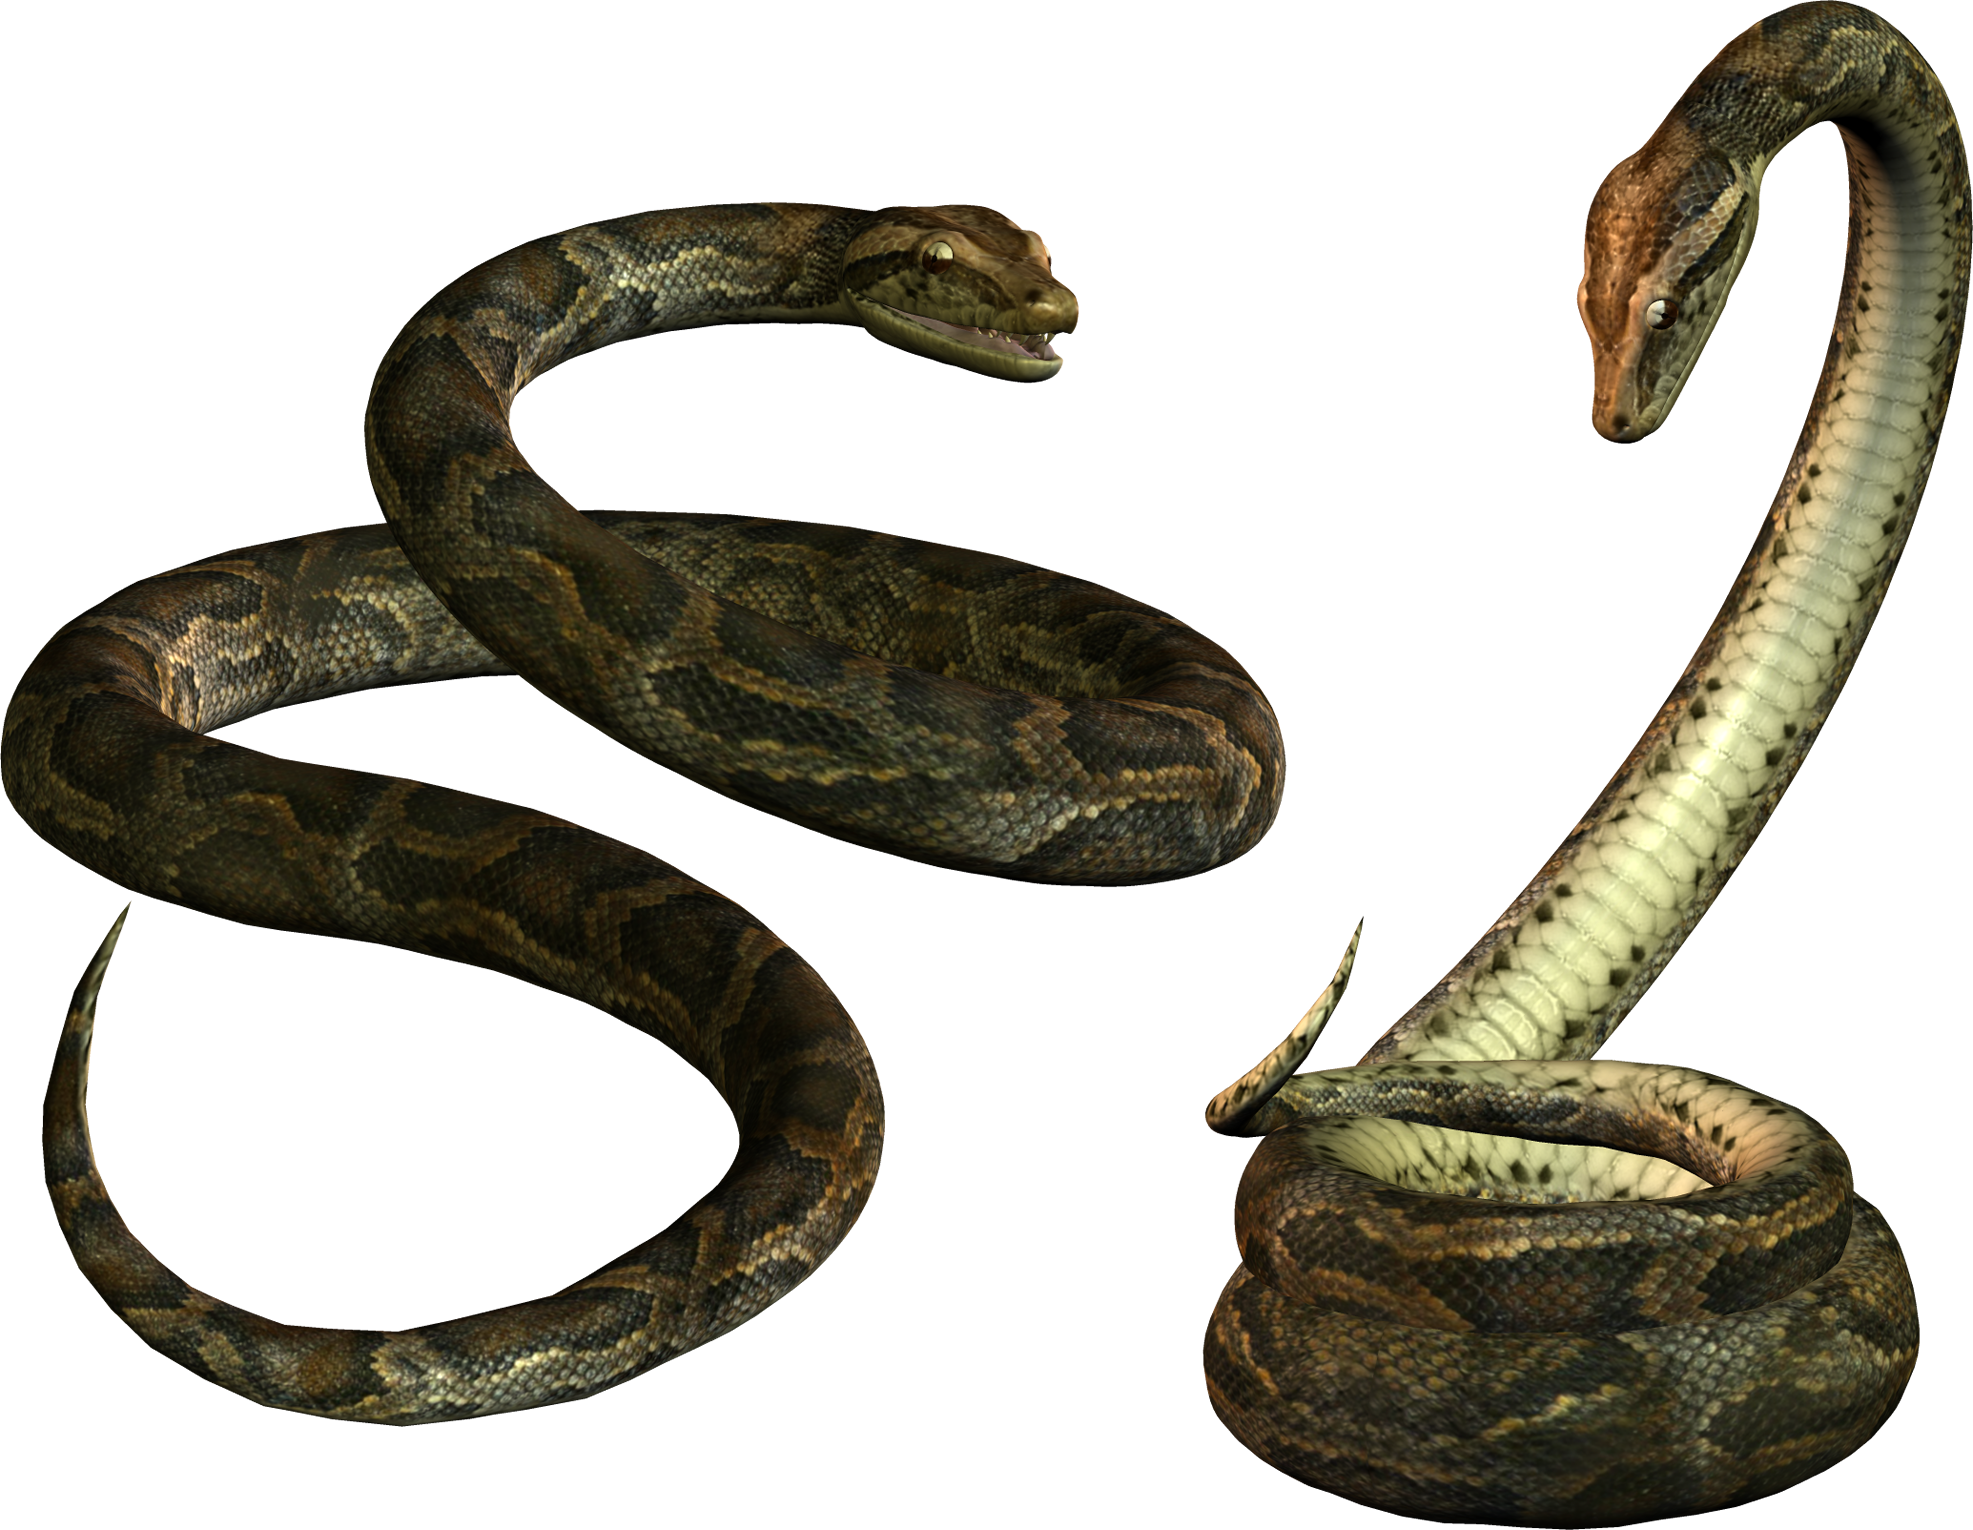 A Group Of Snakes On A Black Background